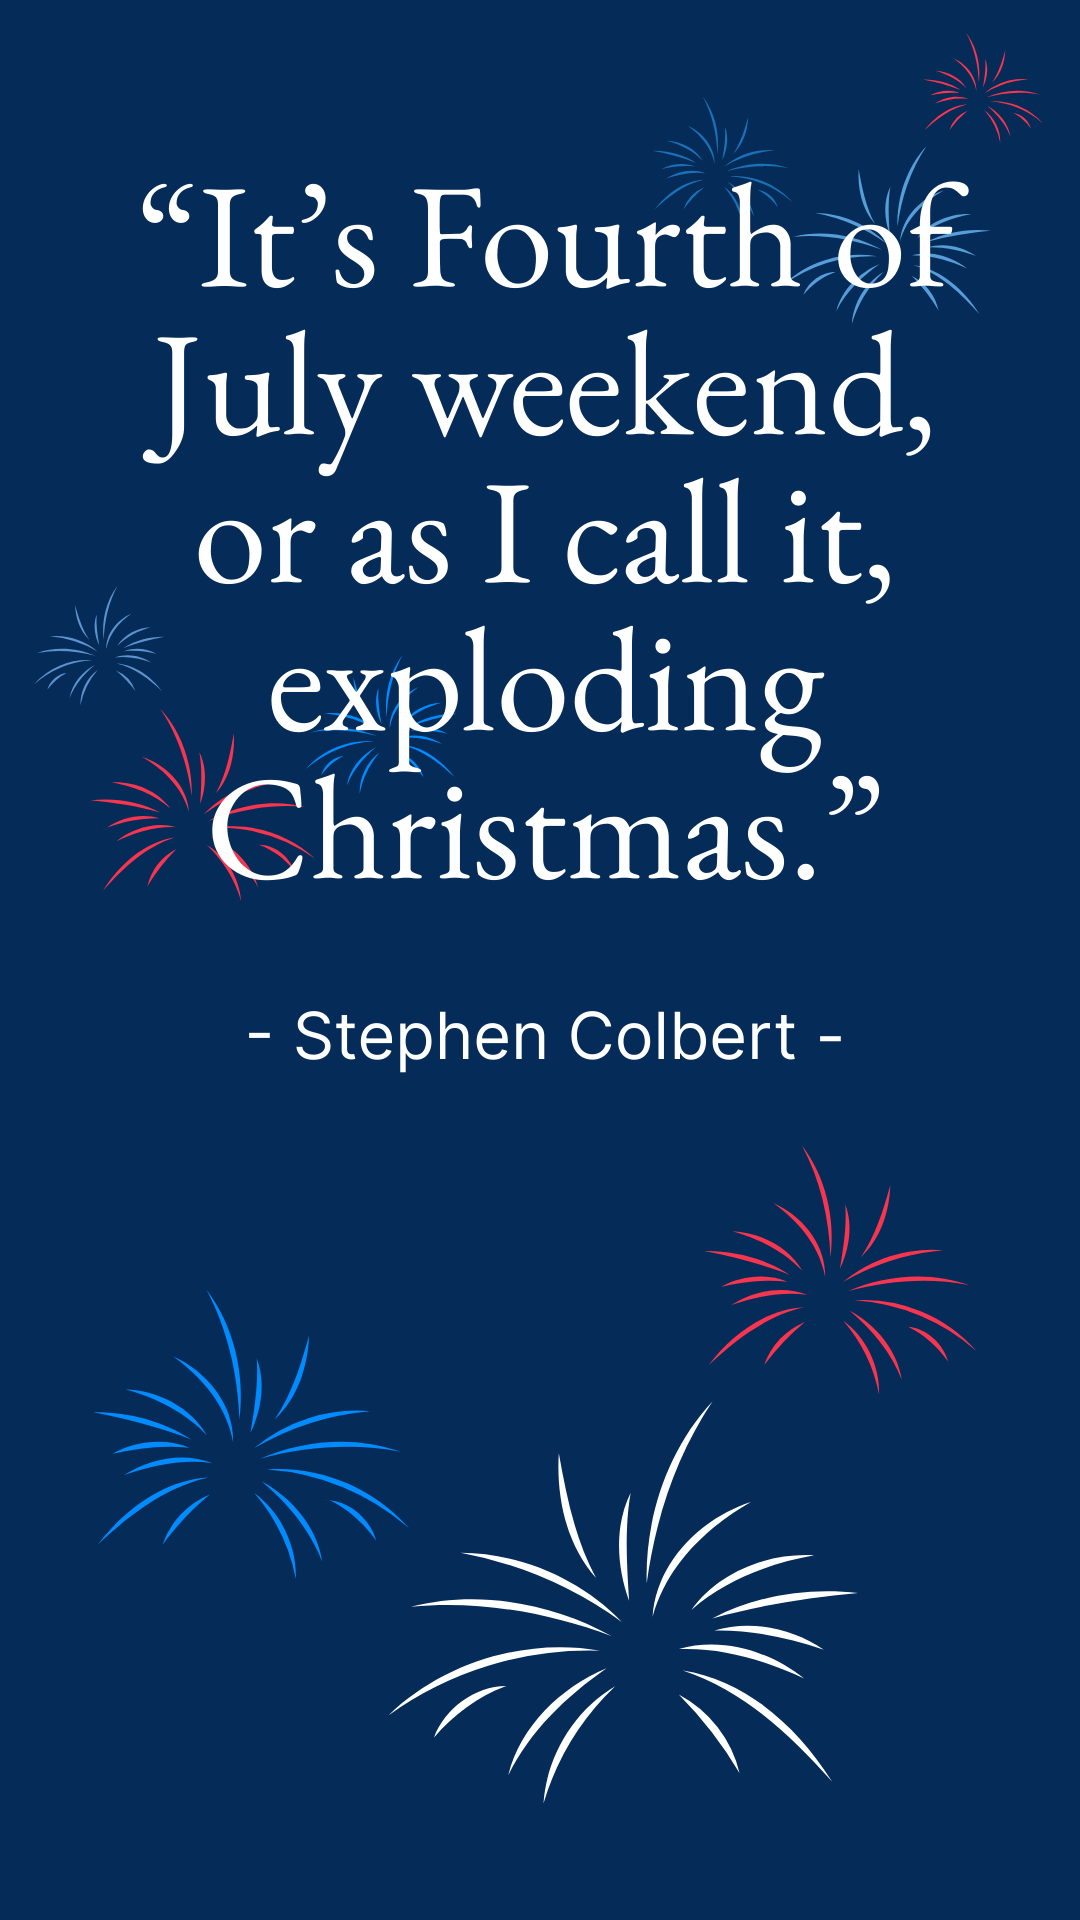 Funny 4th of July Quote